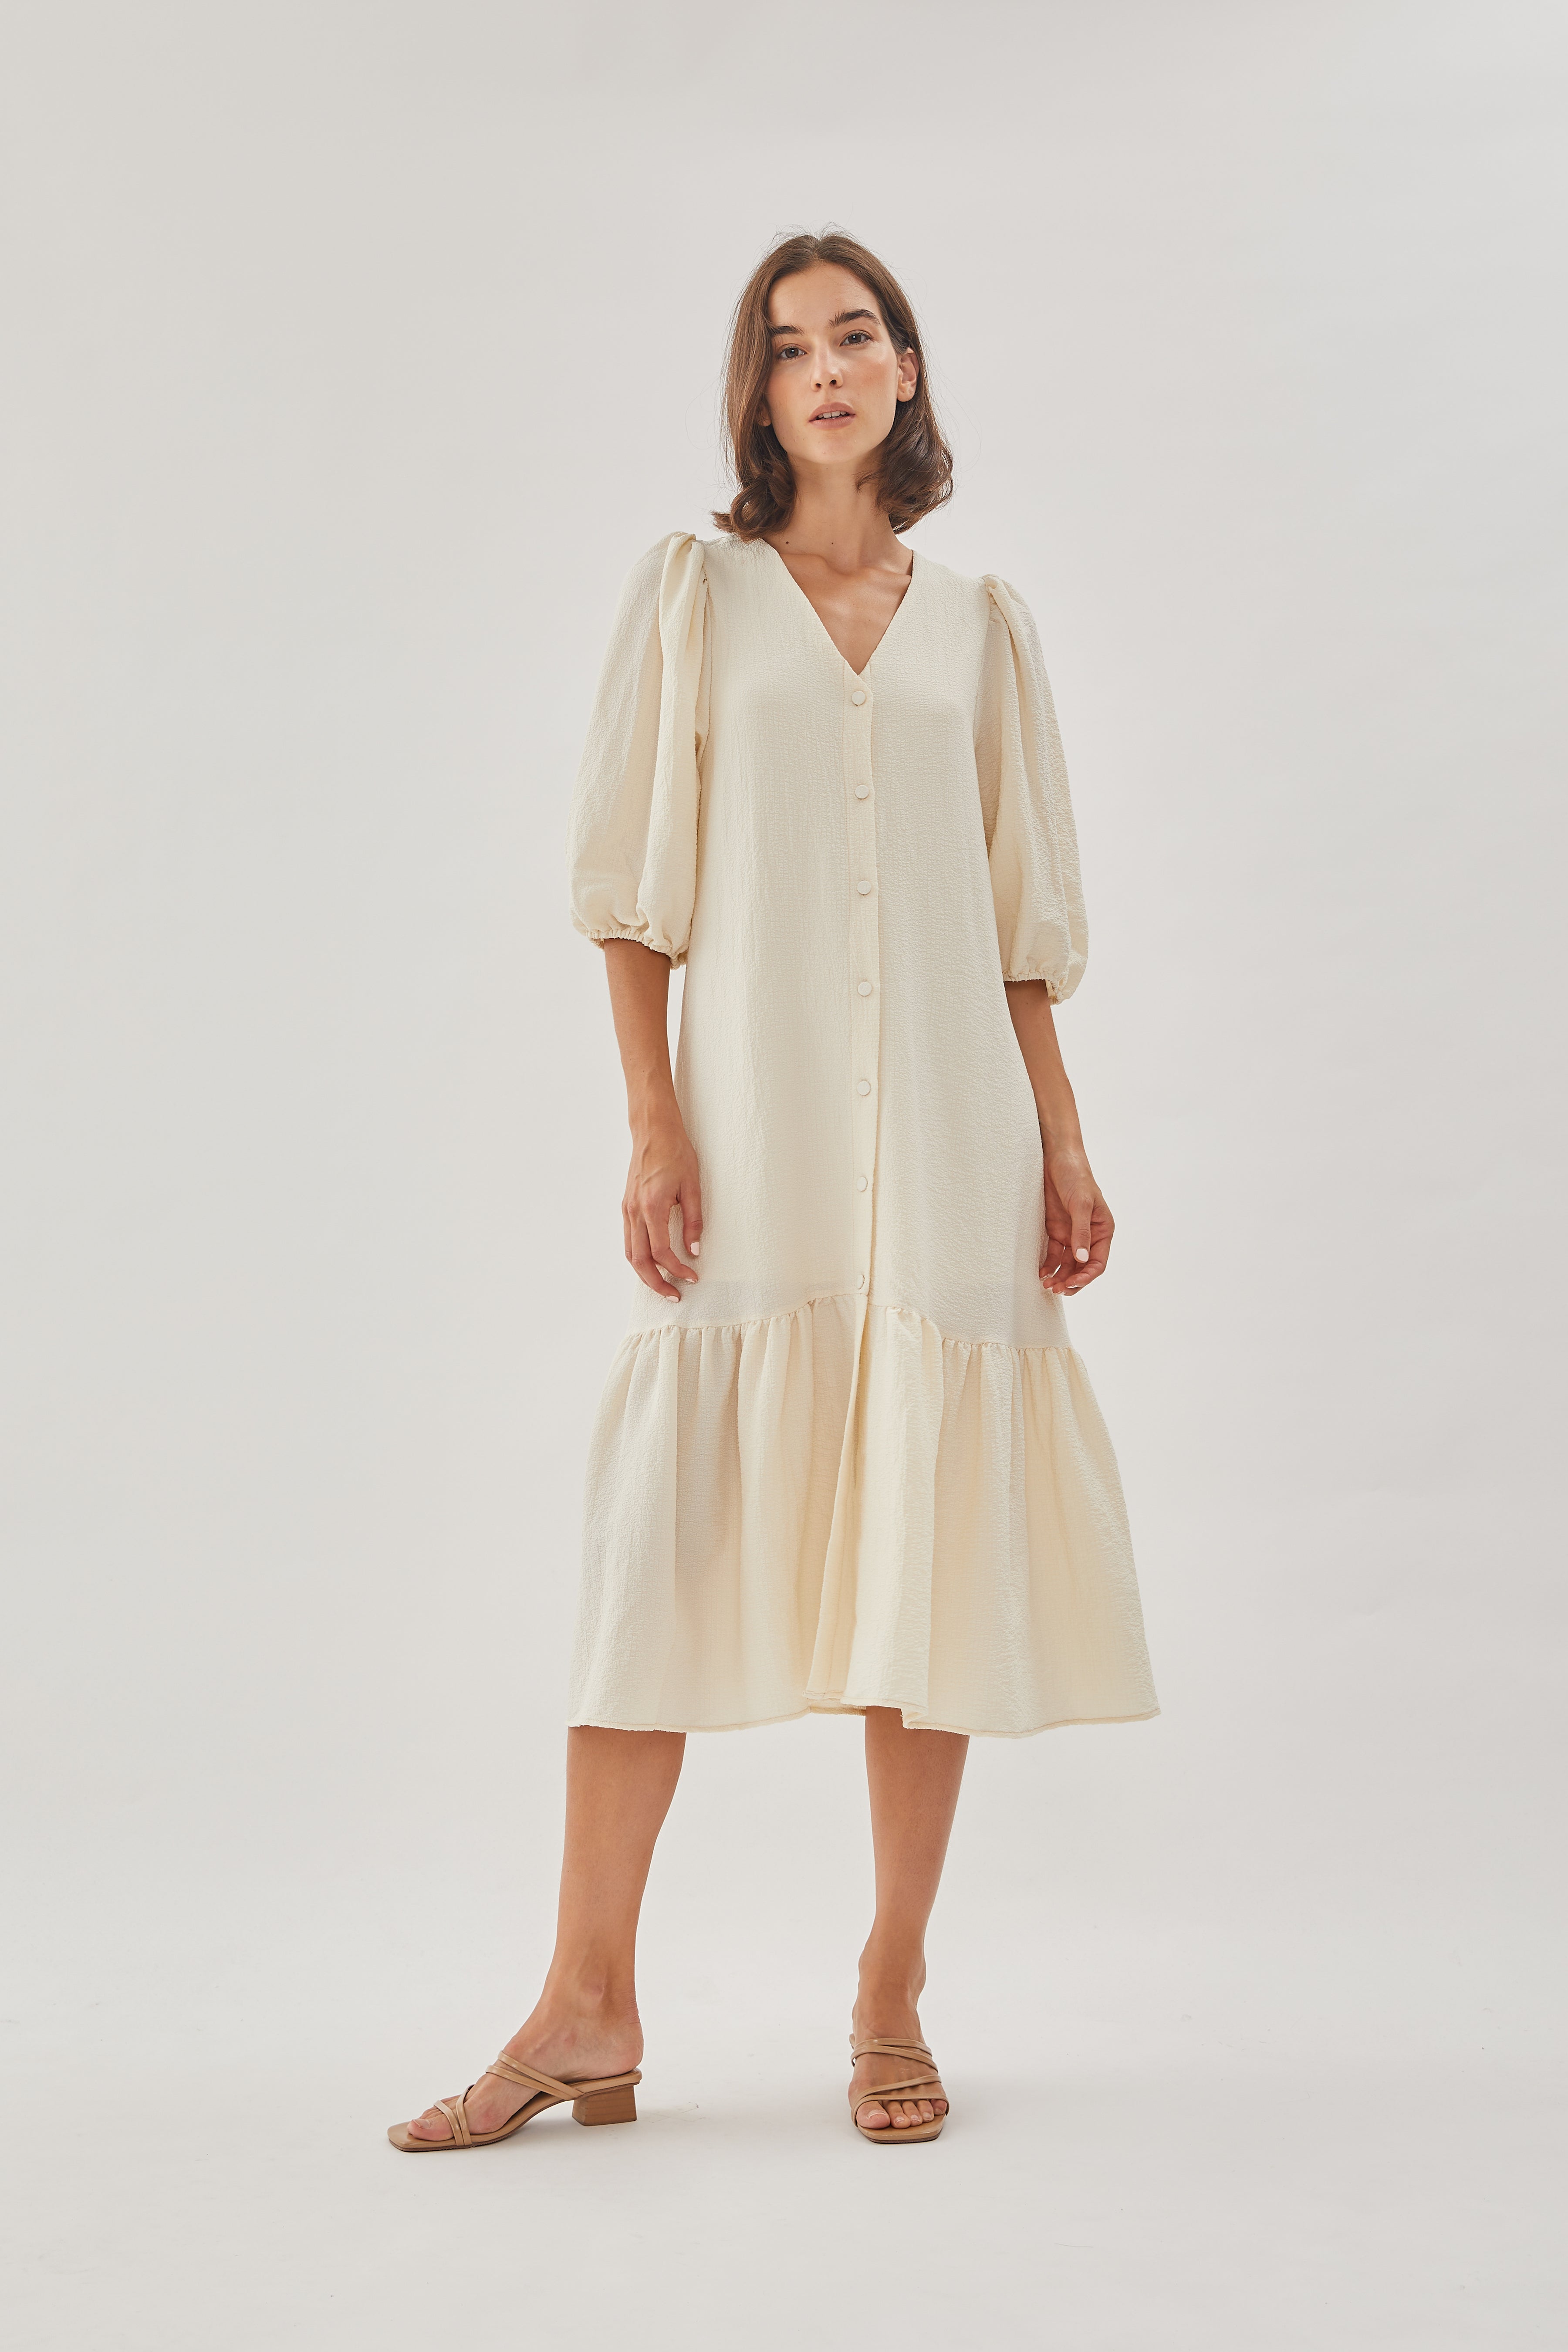 V-neck Midi Dress with Puffed Sleeves in Oatmeal